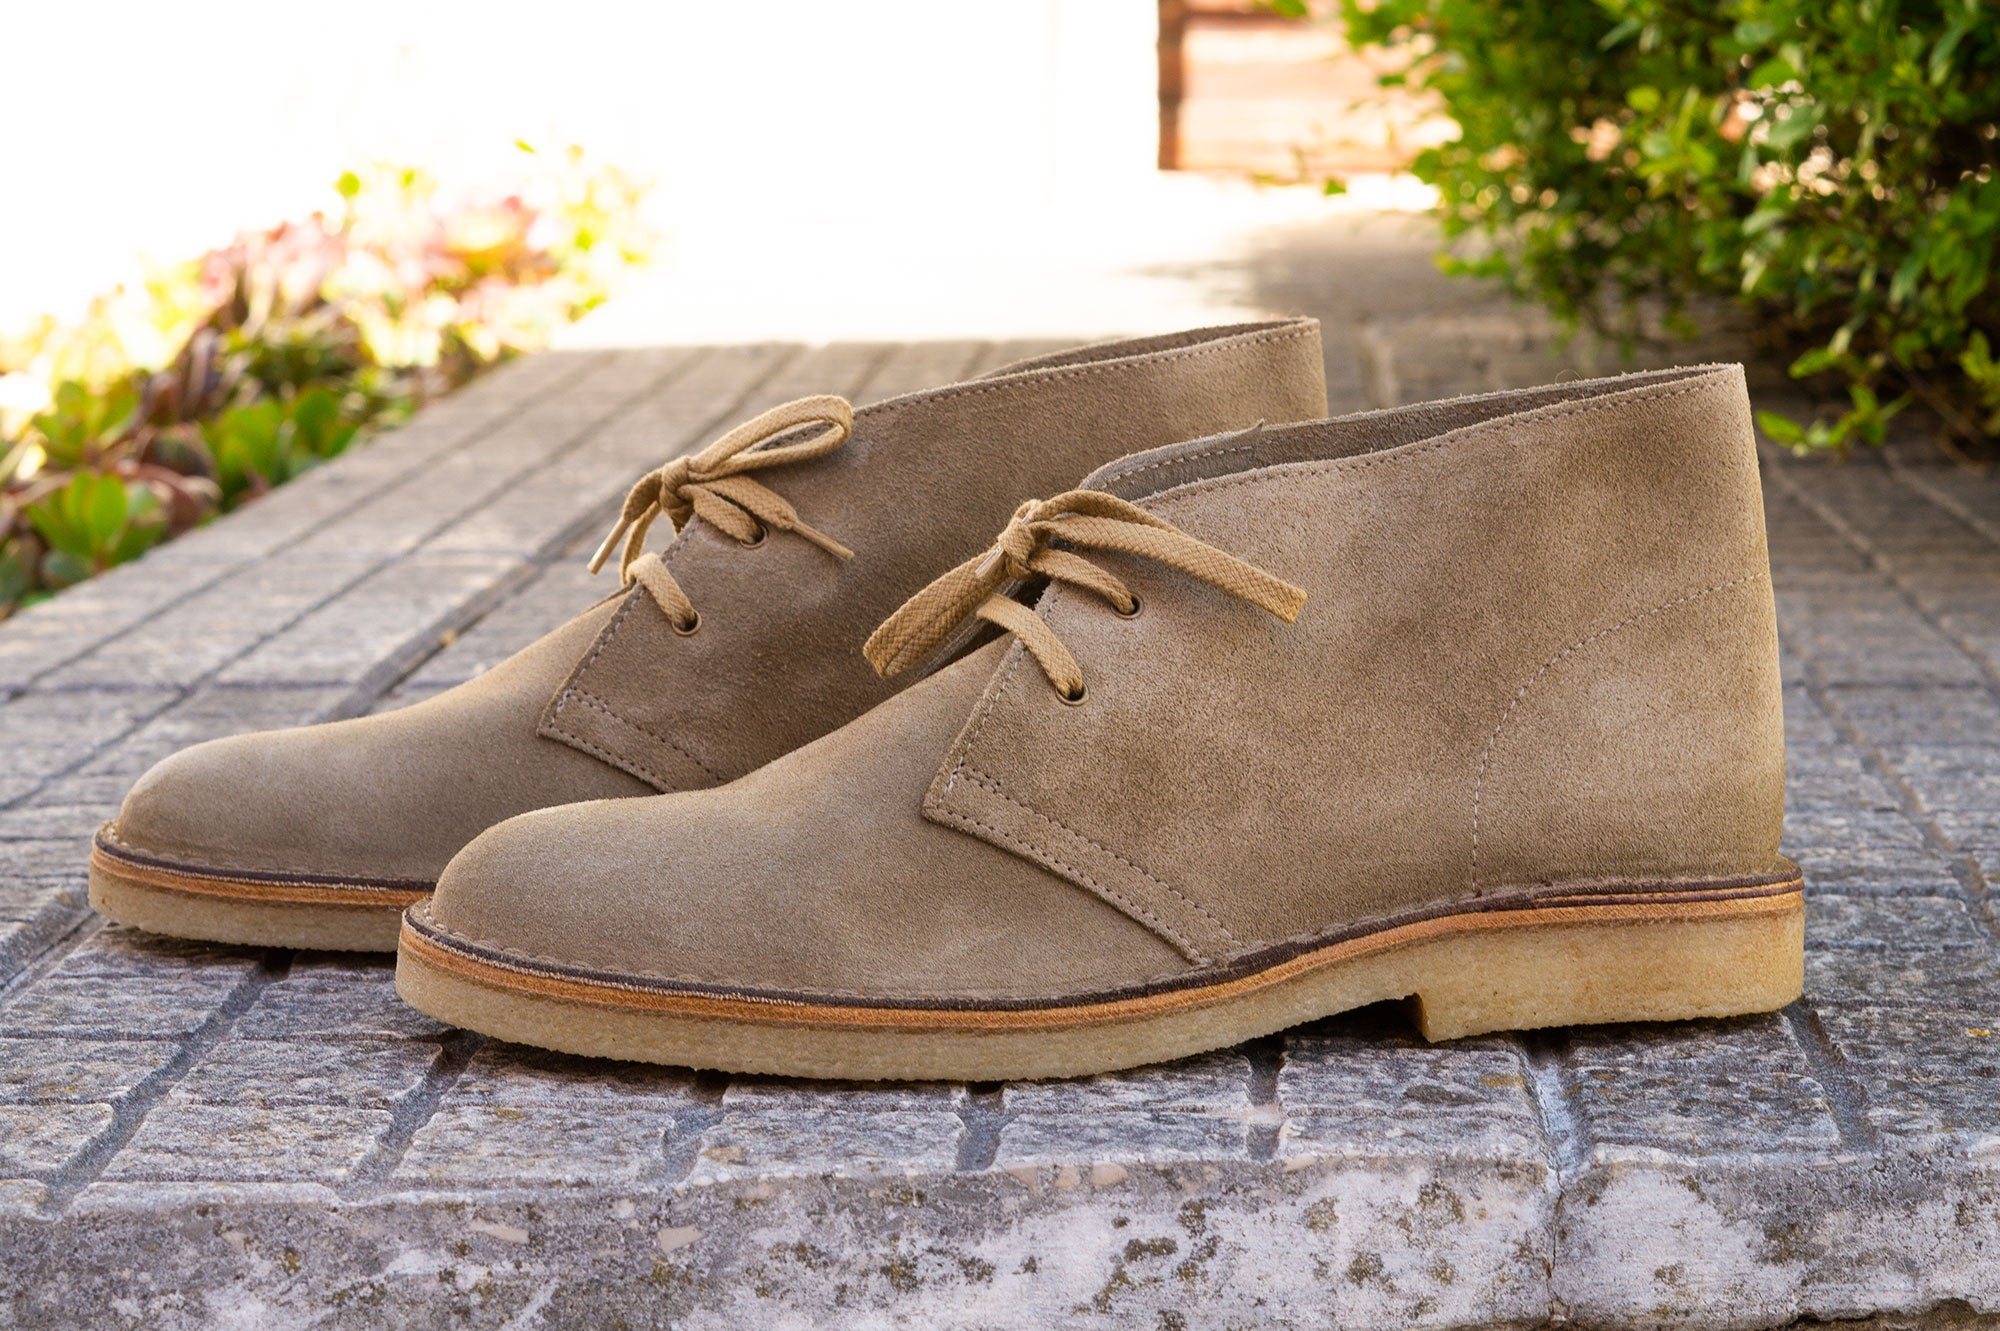 Type 01 Desert Boots In a Brand New Colour: Nevada Sand